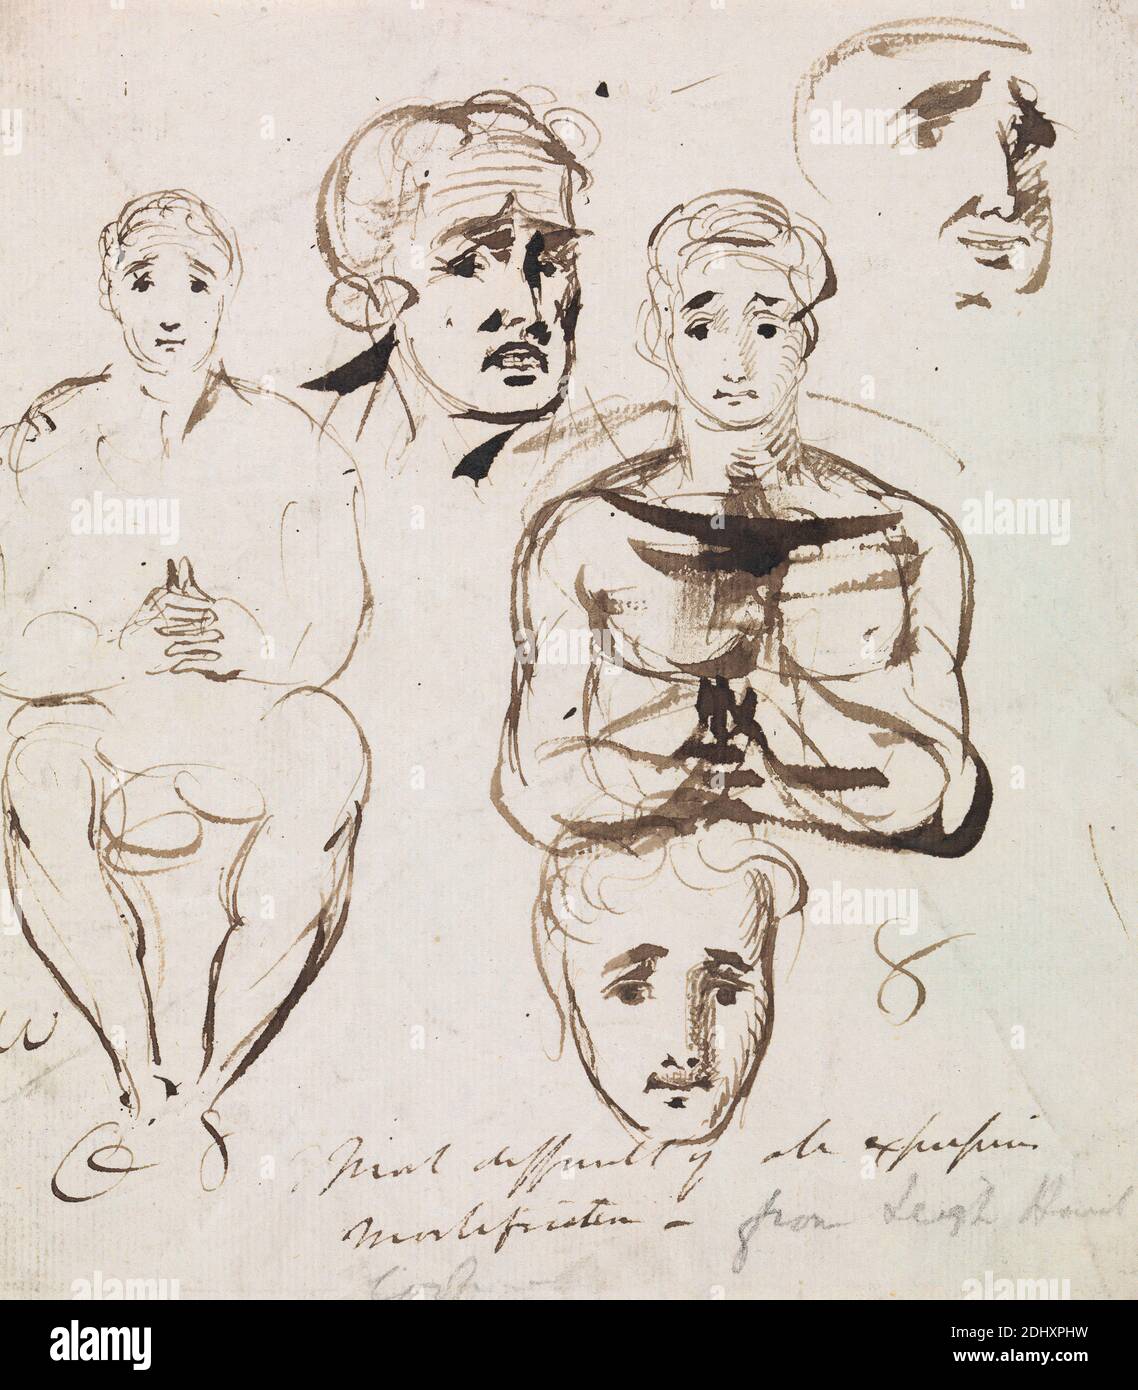 Study of Facial Expressions, Benjamin Robert Haydon, 1786–1846, British, undated, Pen and brown ink on medium, slightly textured, blued white, laid paper, Sheet: 7 5/8 × 6 3/4 inches (19.4 × 17.1 cm), portrait Stock Photo